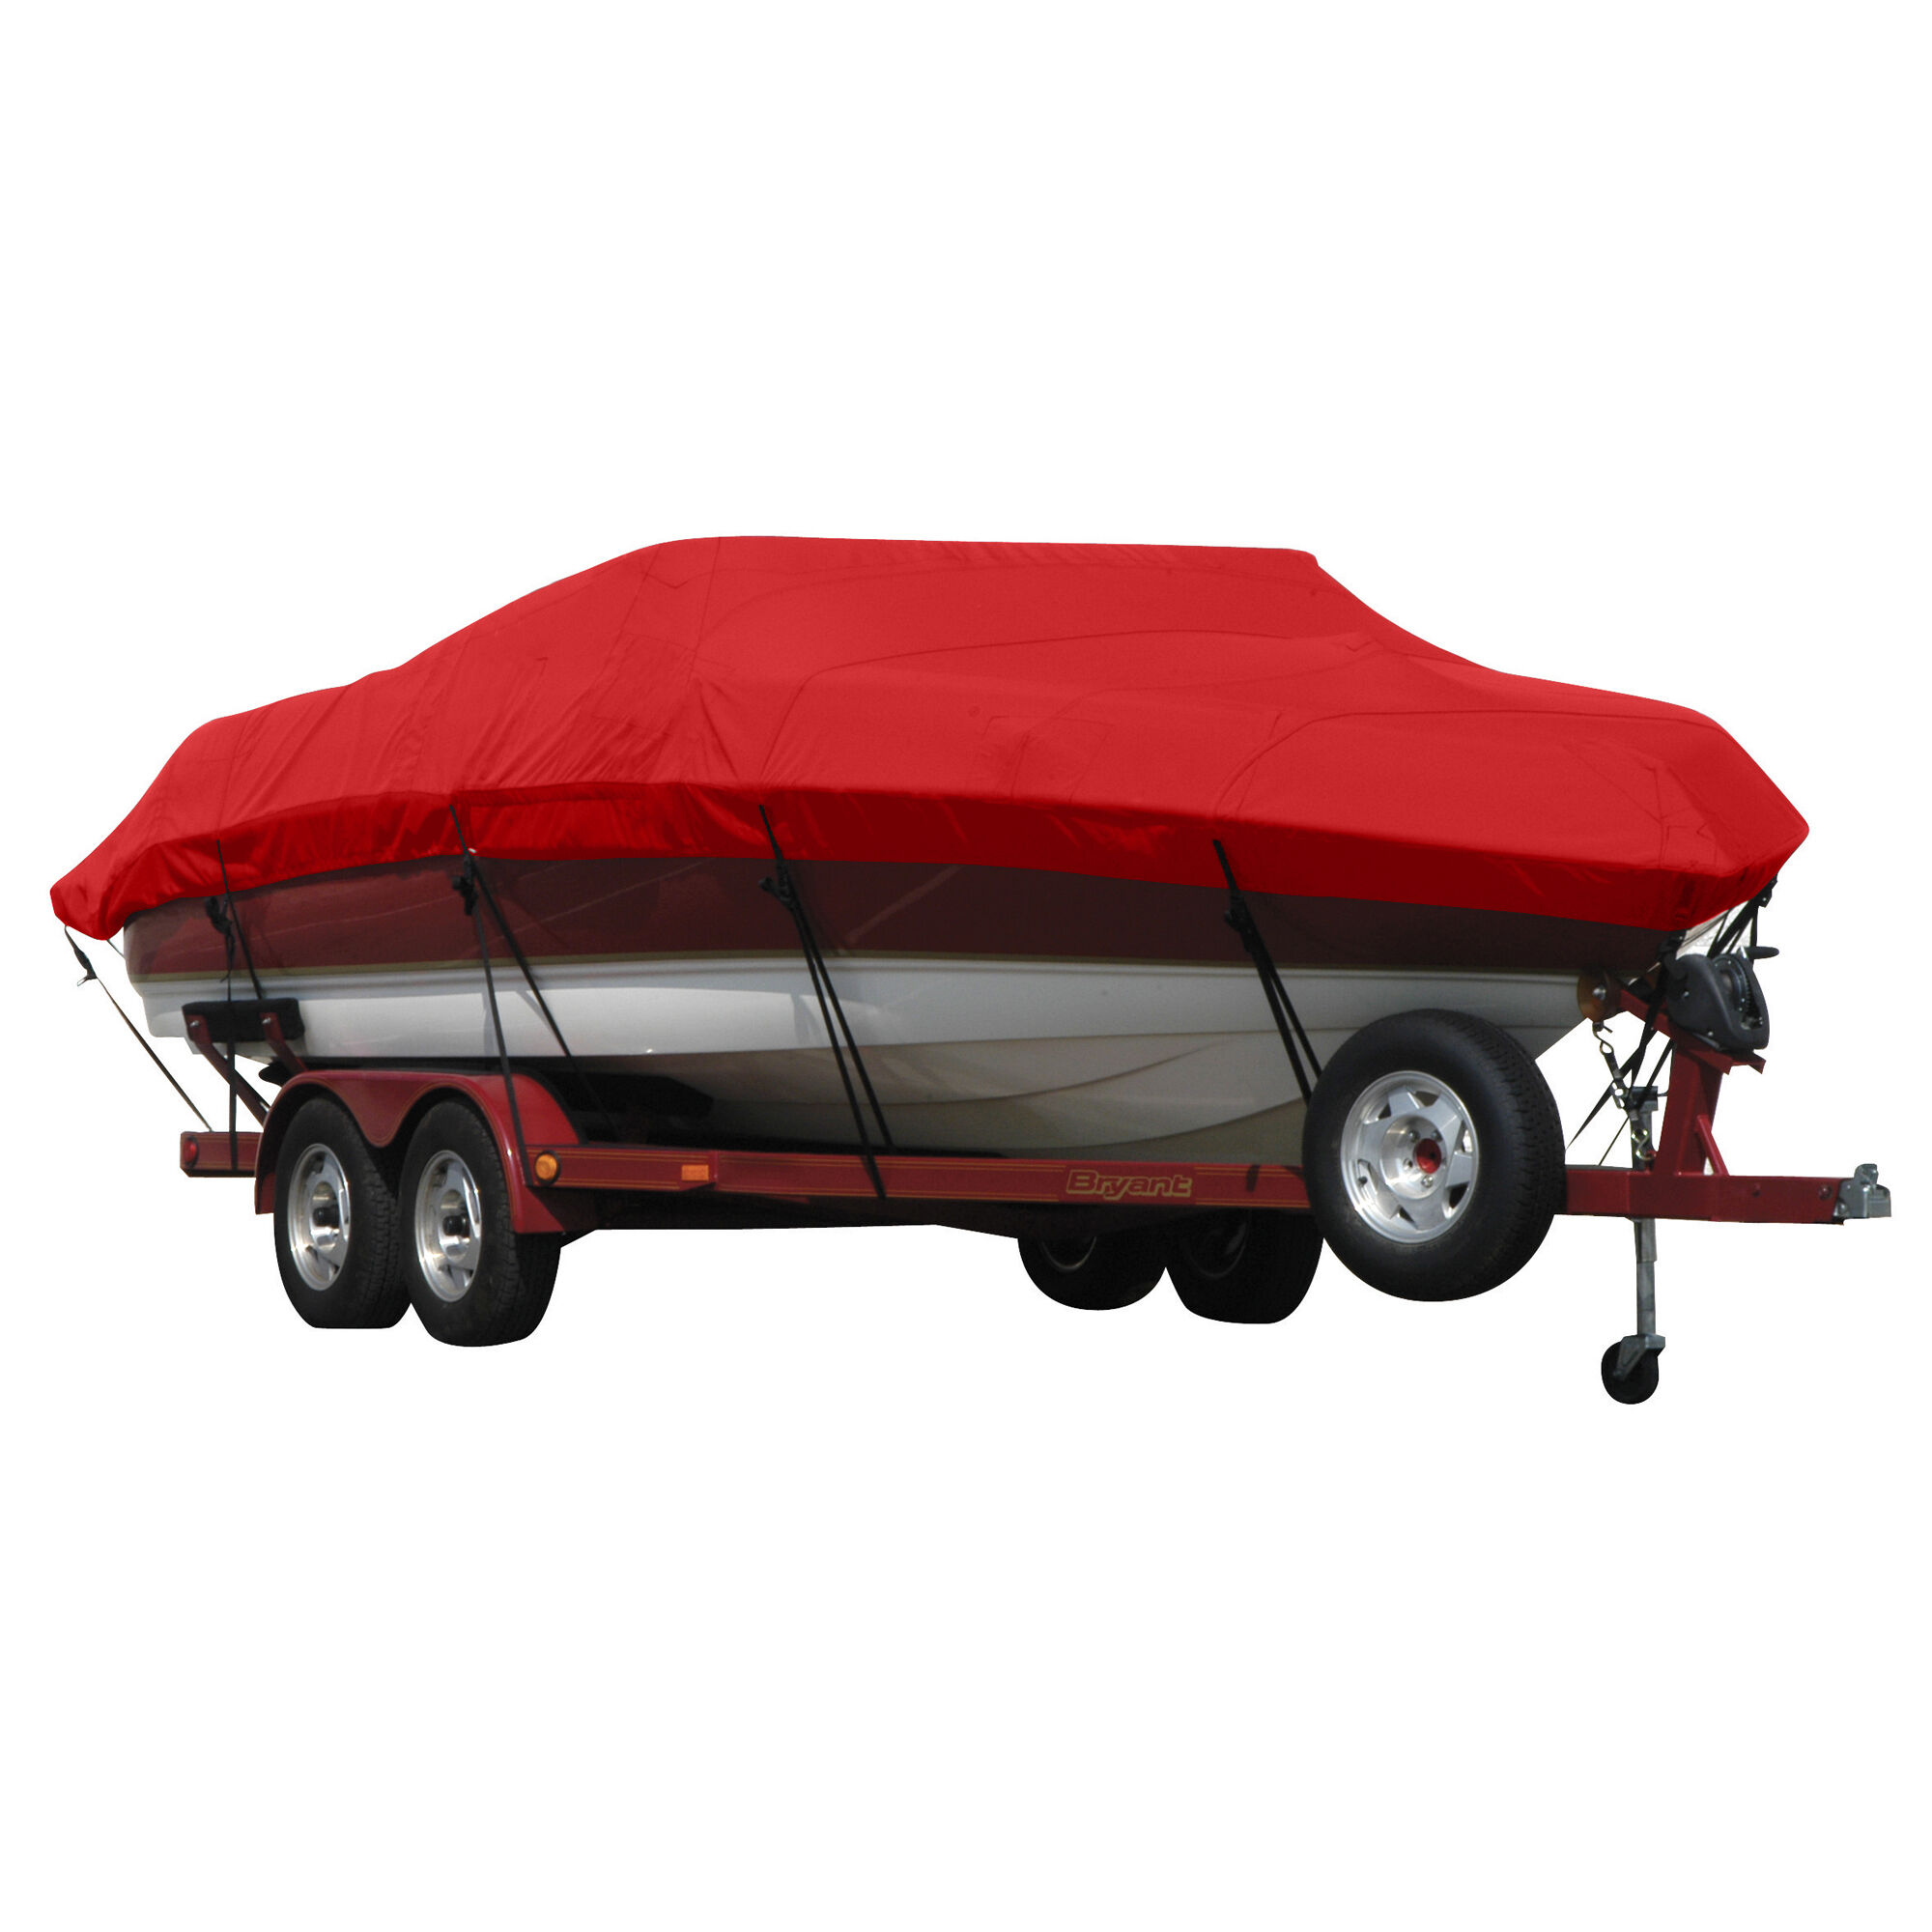 Covermate Exact Fit Sunbrella Boat Cover For Cobalt 262 Bowrider w/ Fiberglass Wing in Jockey Red Acrylic